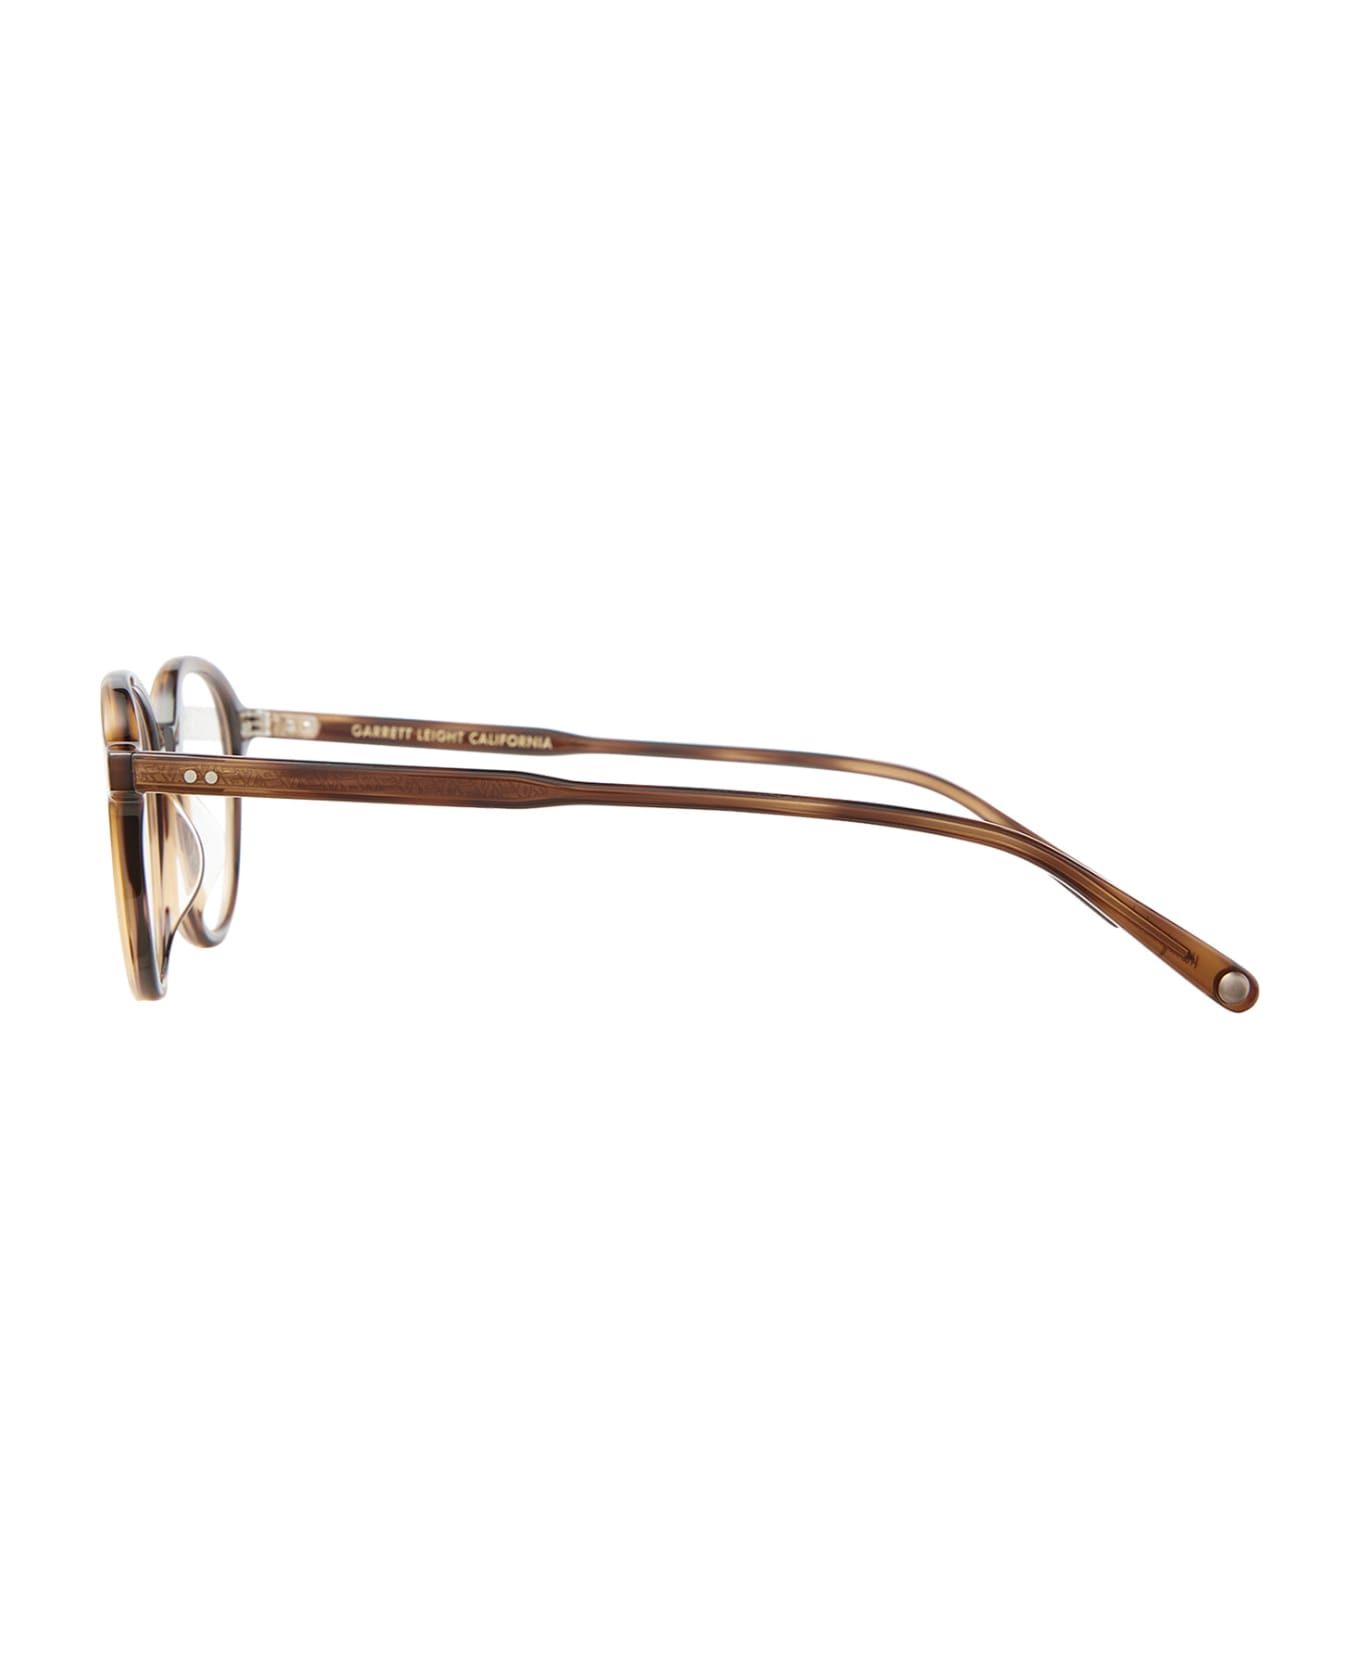 Garrett Leight Franklin Spotted Brown Shell Glasses - Spotted Brown Shell